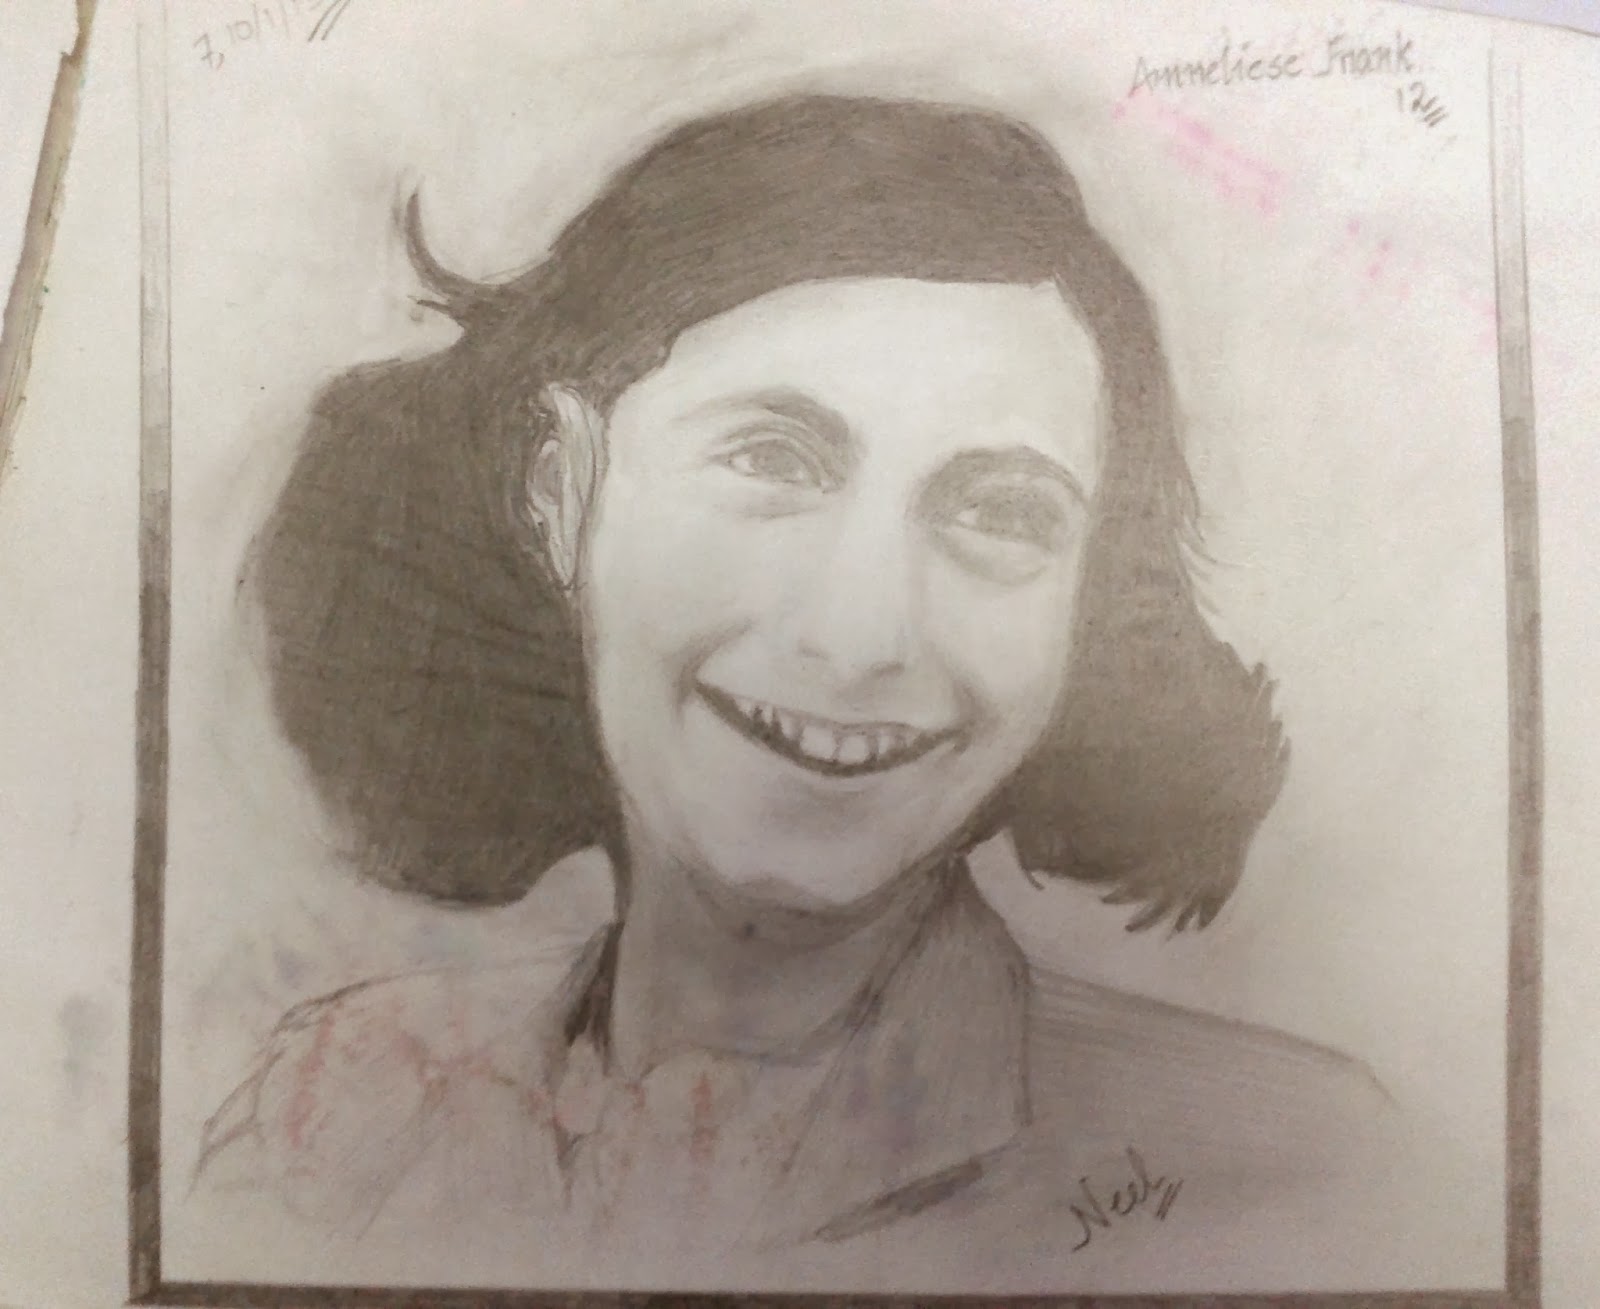 ...just that I like to draw The Anne Frank story...